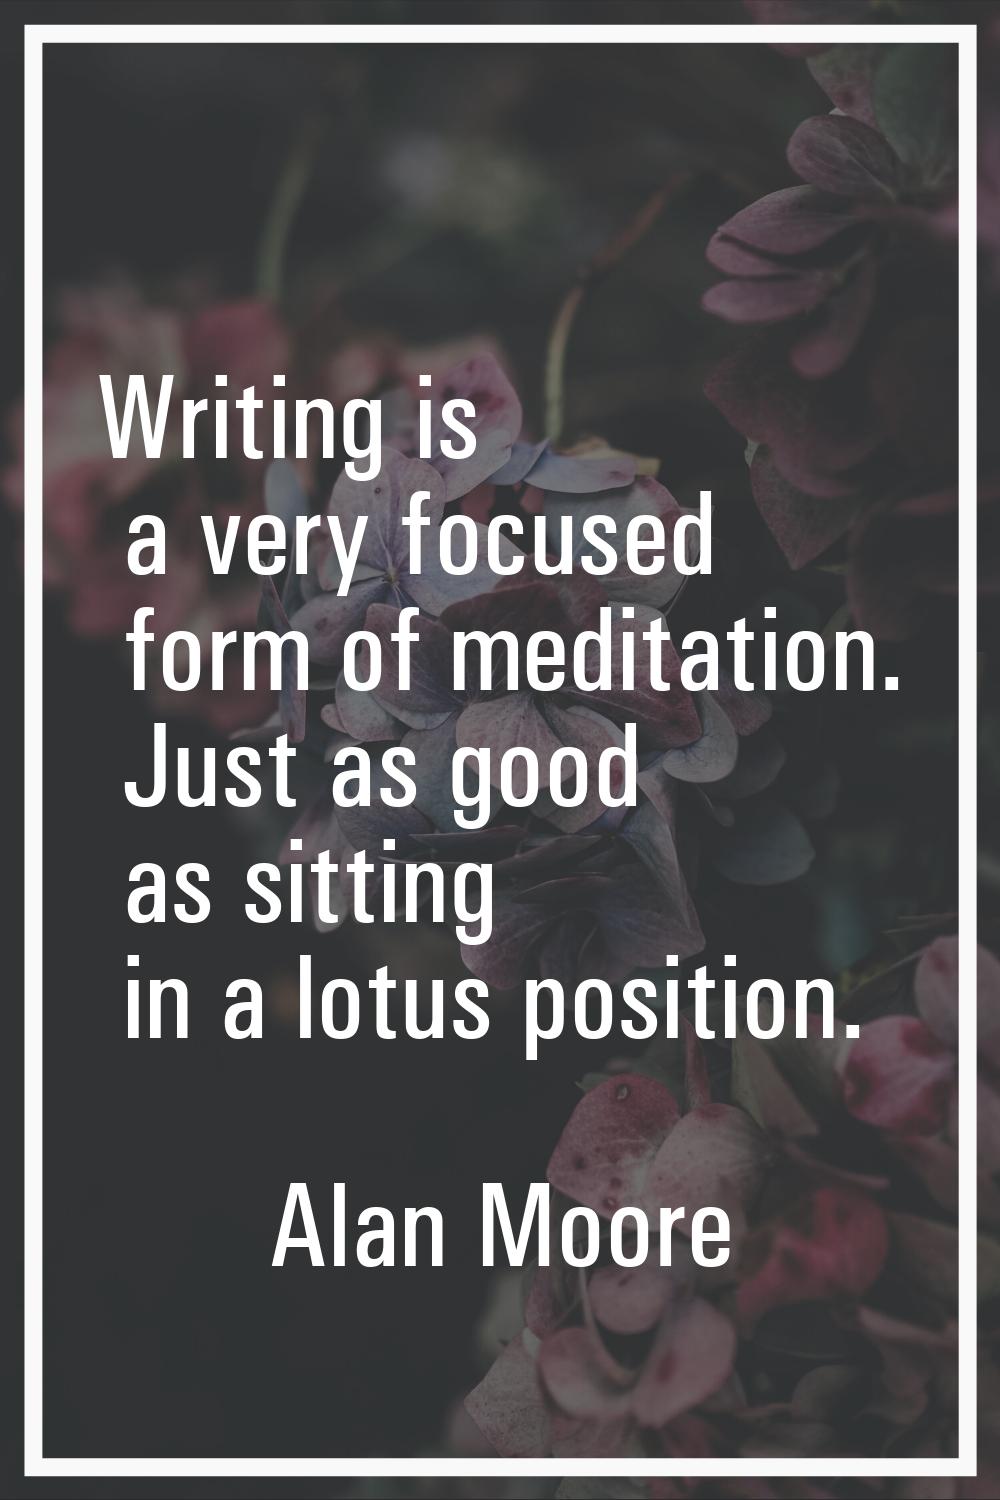 Writing is a very focused form of meditation. Just as good as sitting in a lotus position.